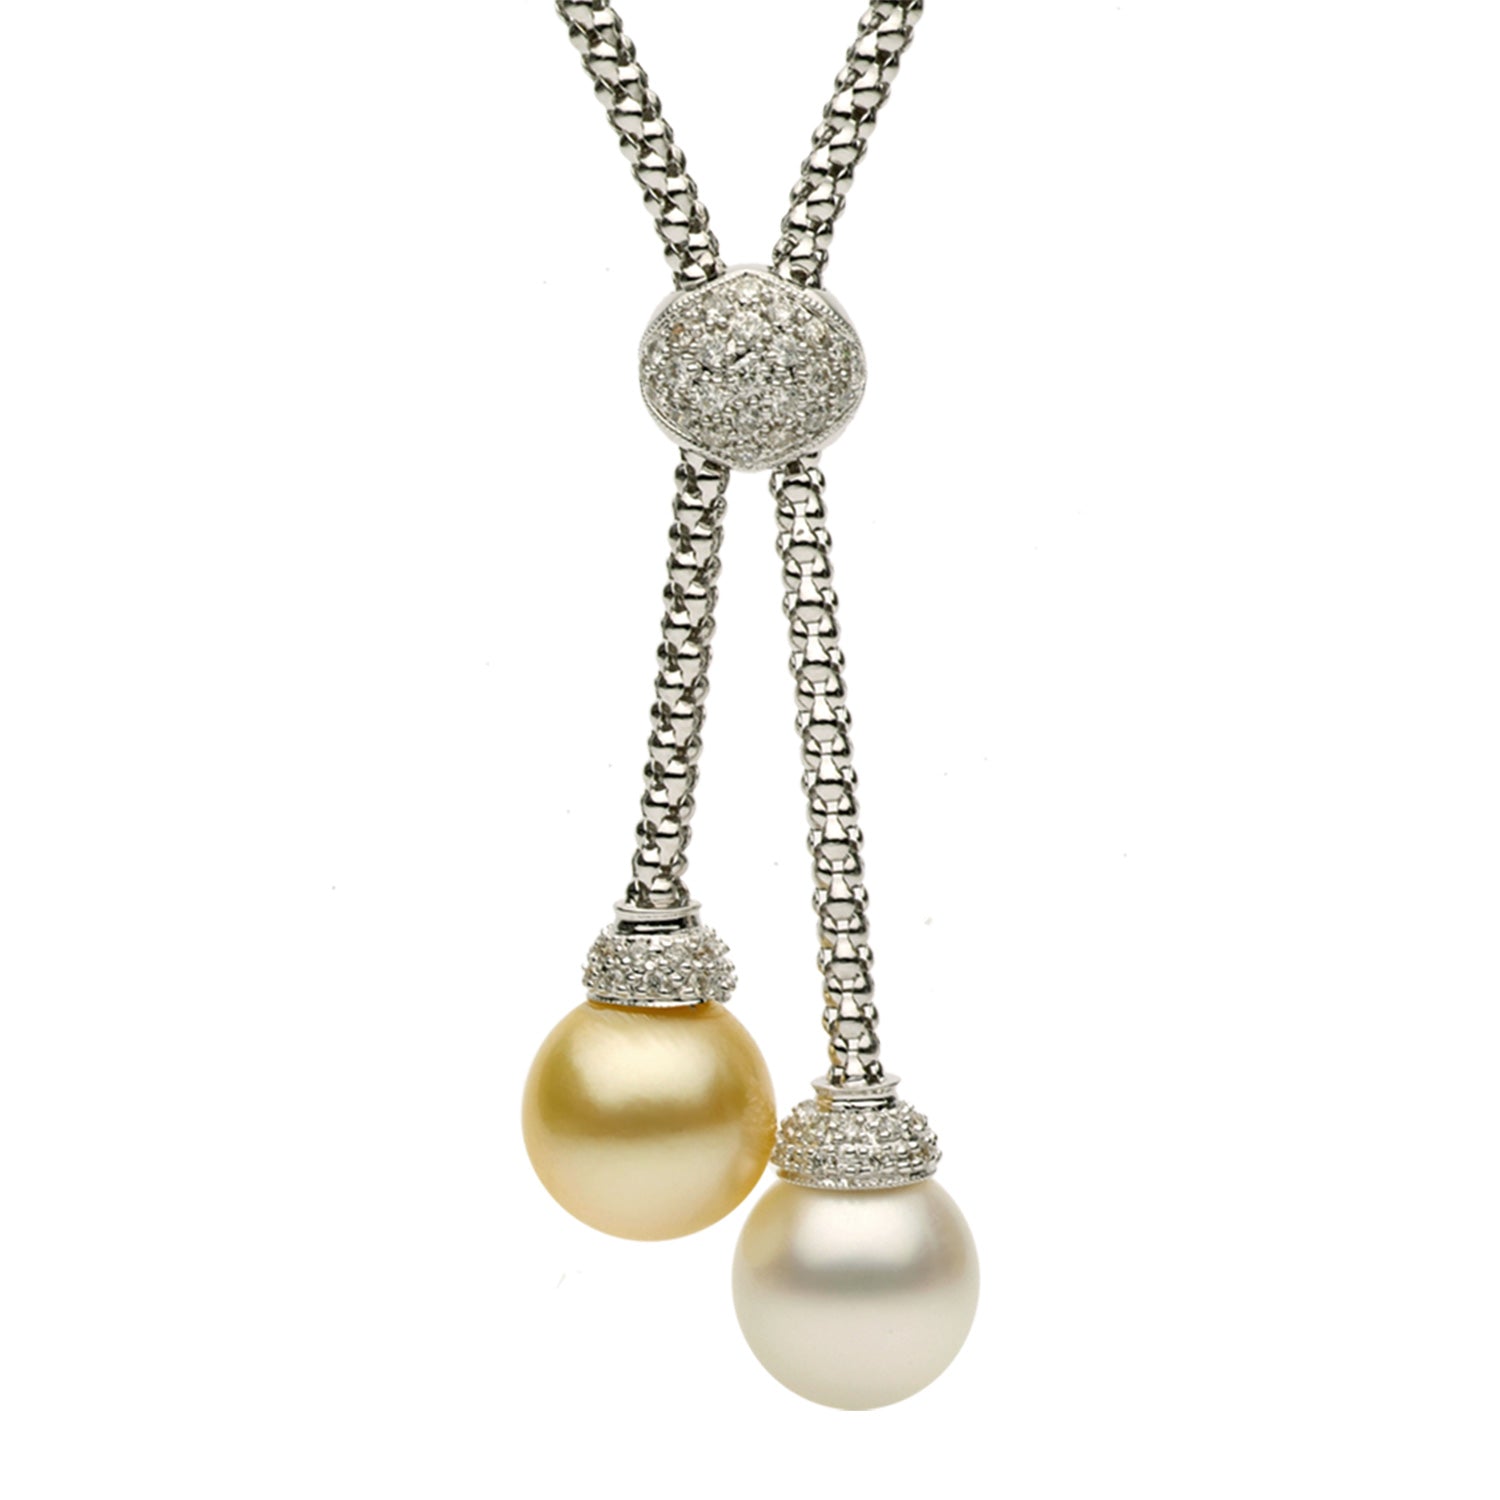 18KW White & Golden South Sea Pearl Necklace, 11-12mm